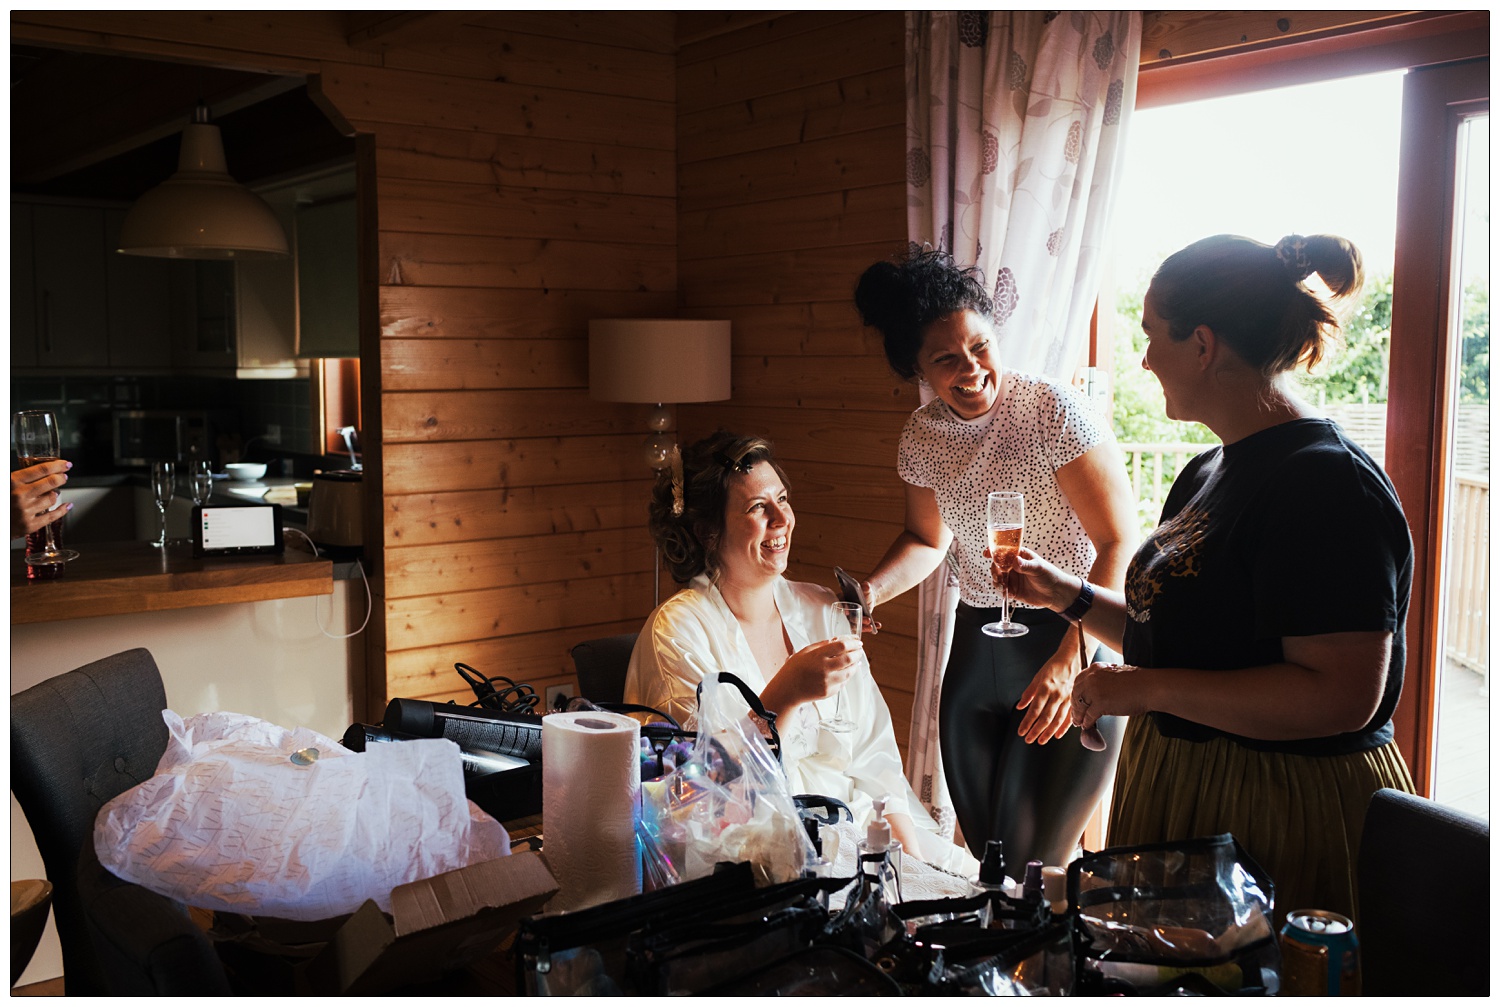 A woman in a white dressing gown raises a glass with a hair dresser and make up artist. They are laughing.